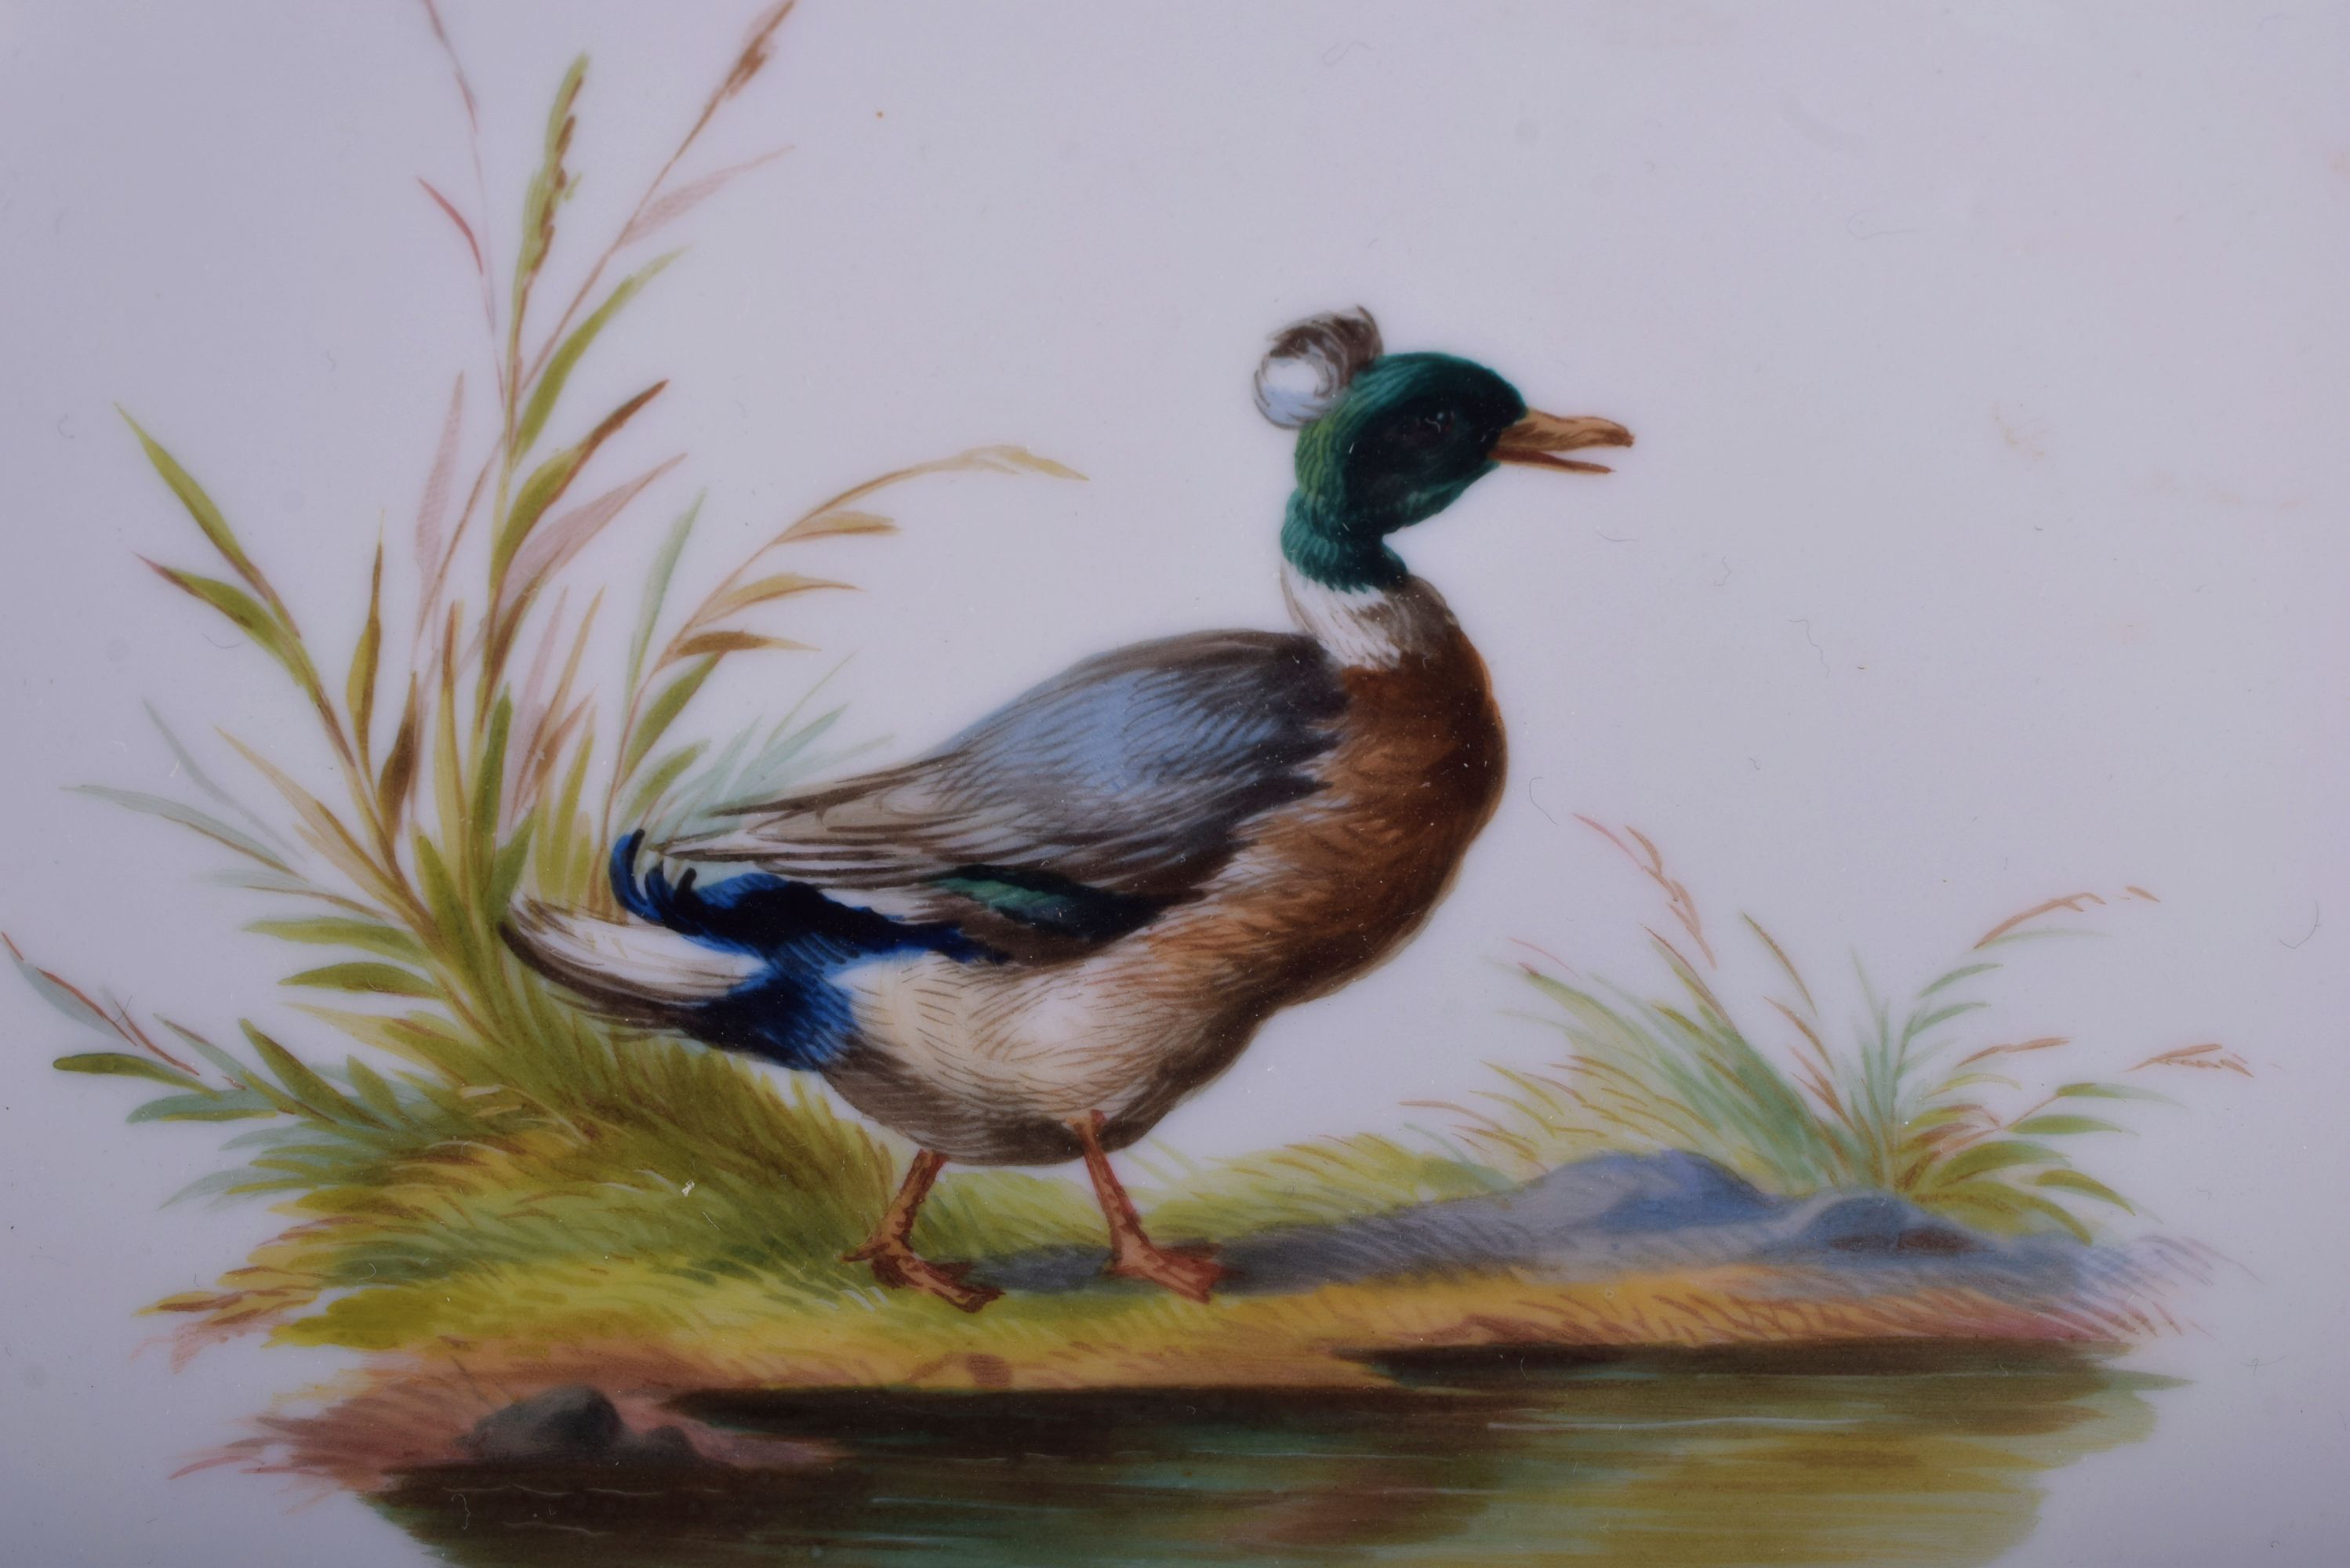 AN ANTIQUE MEISSEN RETICULATED PORCELAIN DISH painted with a duck. 24.5 cm diameter. - Image 3 of 3